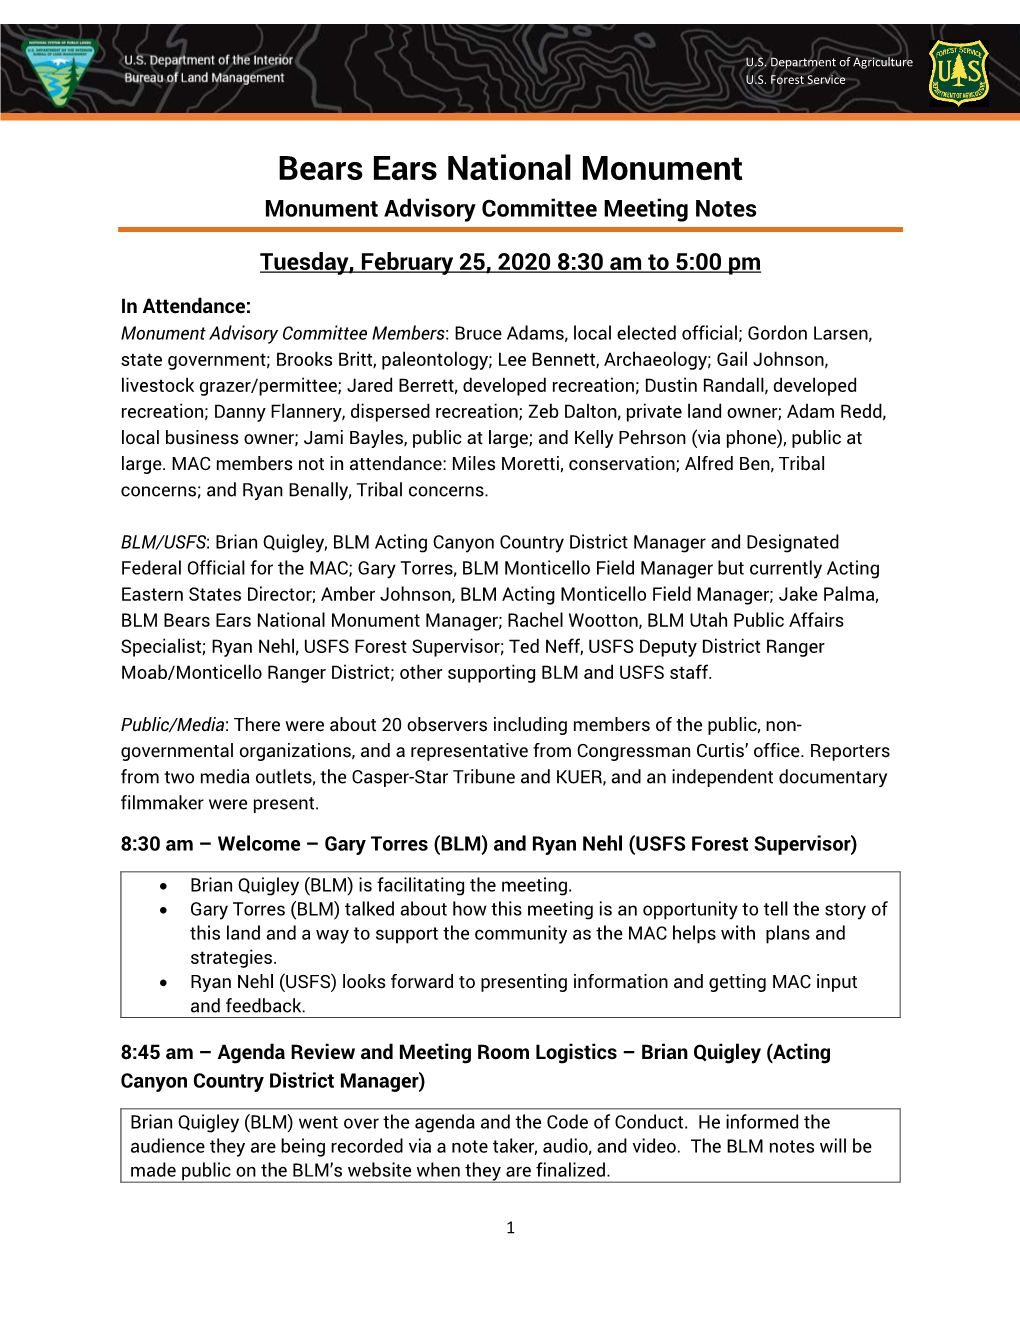 Bears Ears National Monument Monument Advisory Committee Meeting Notes